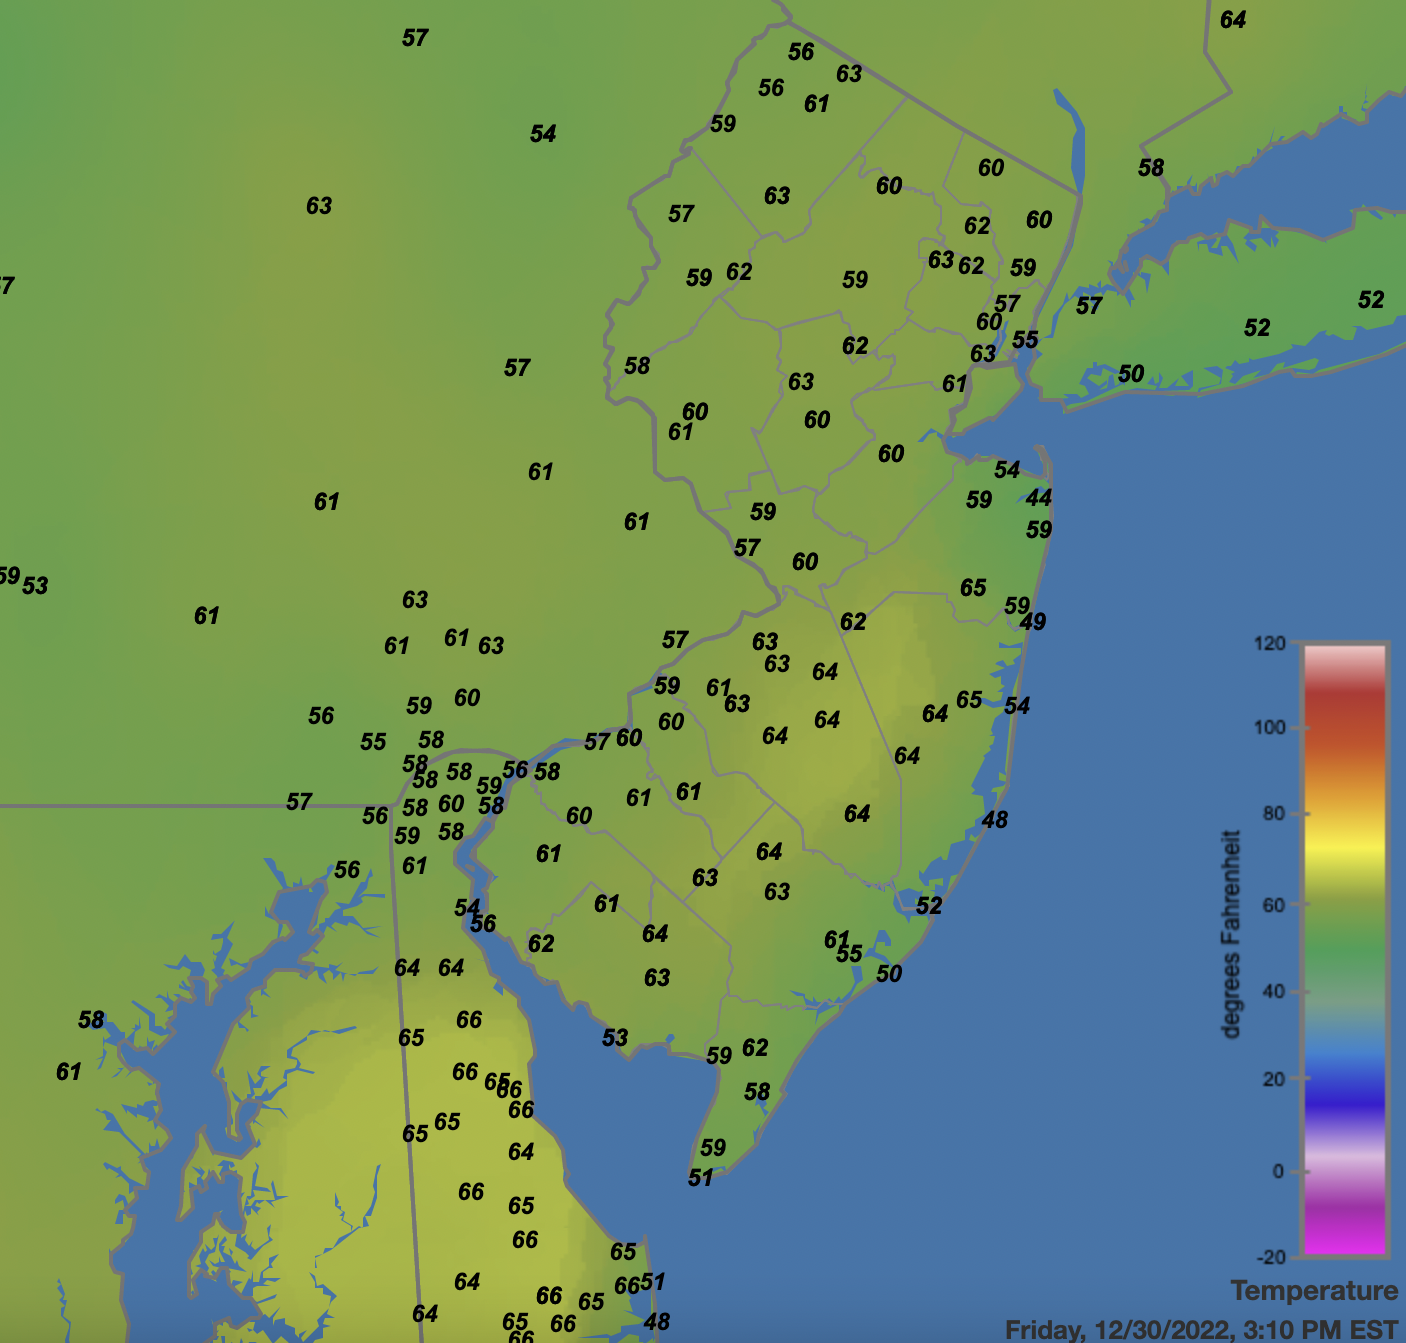 Surface air temperatures across NJ and nearby states at 3:10 PM on December 30th.